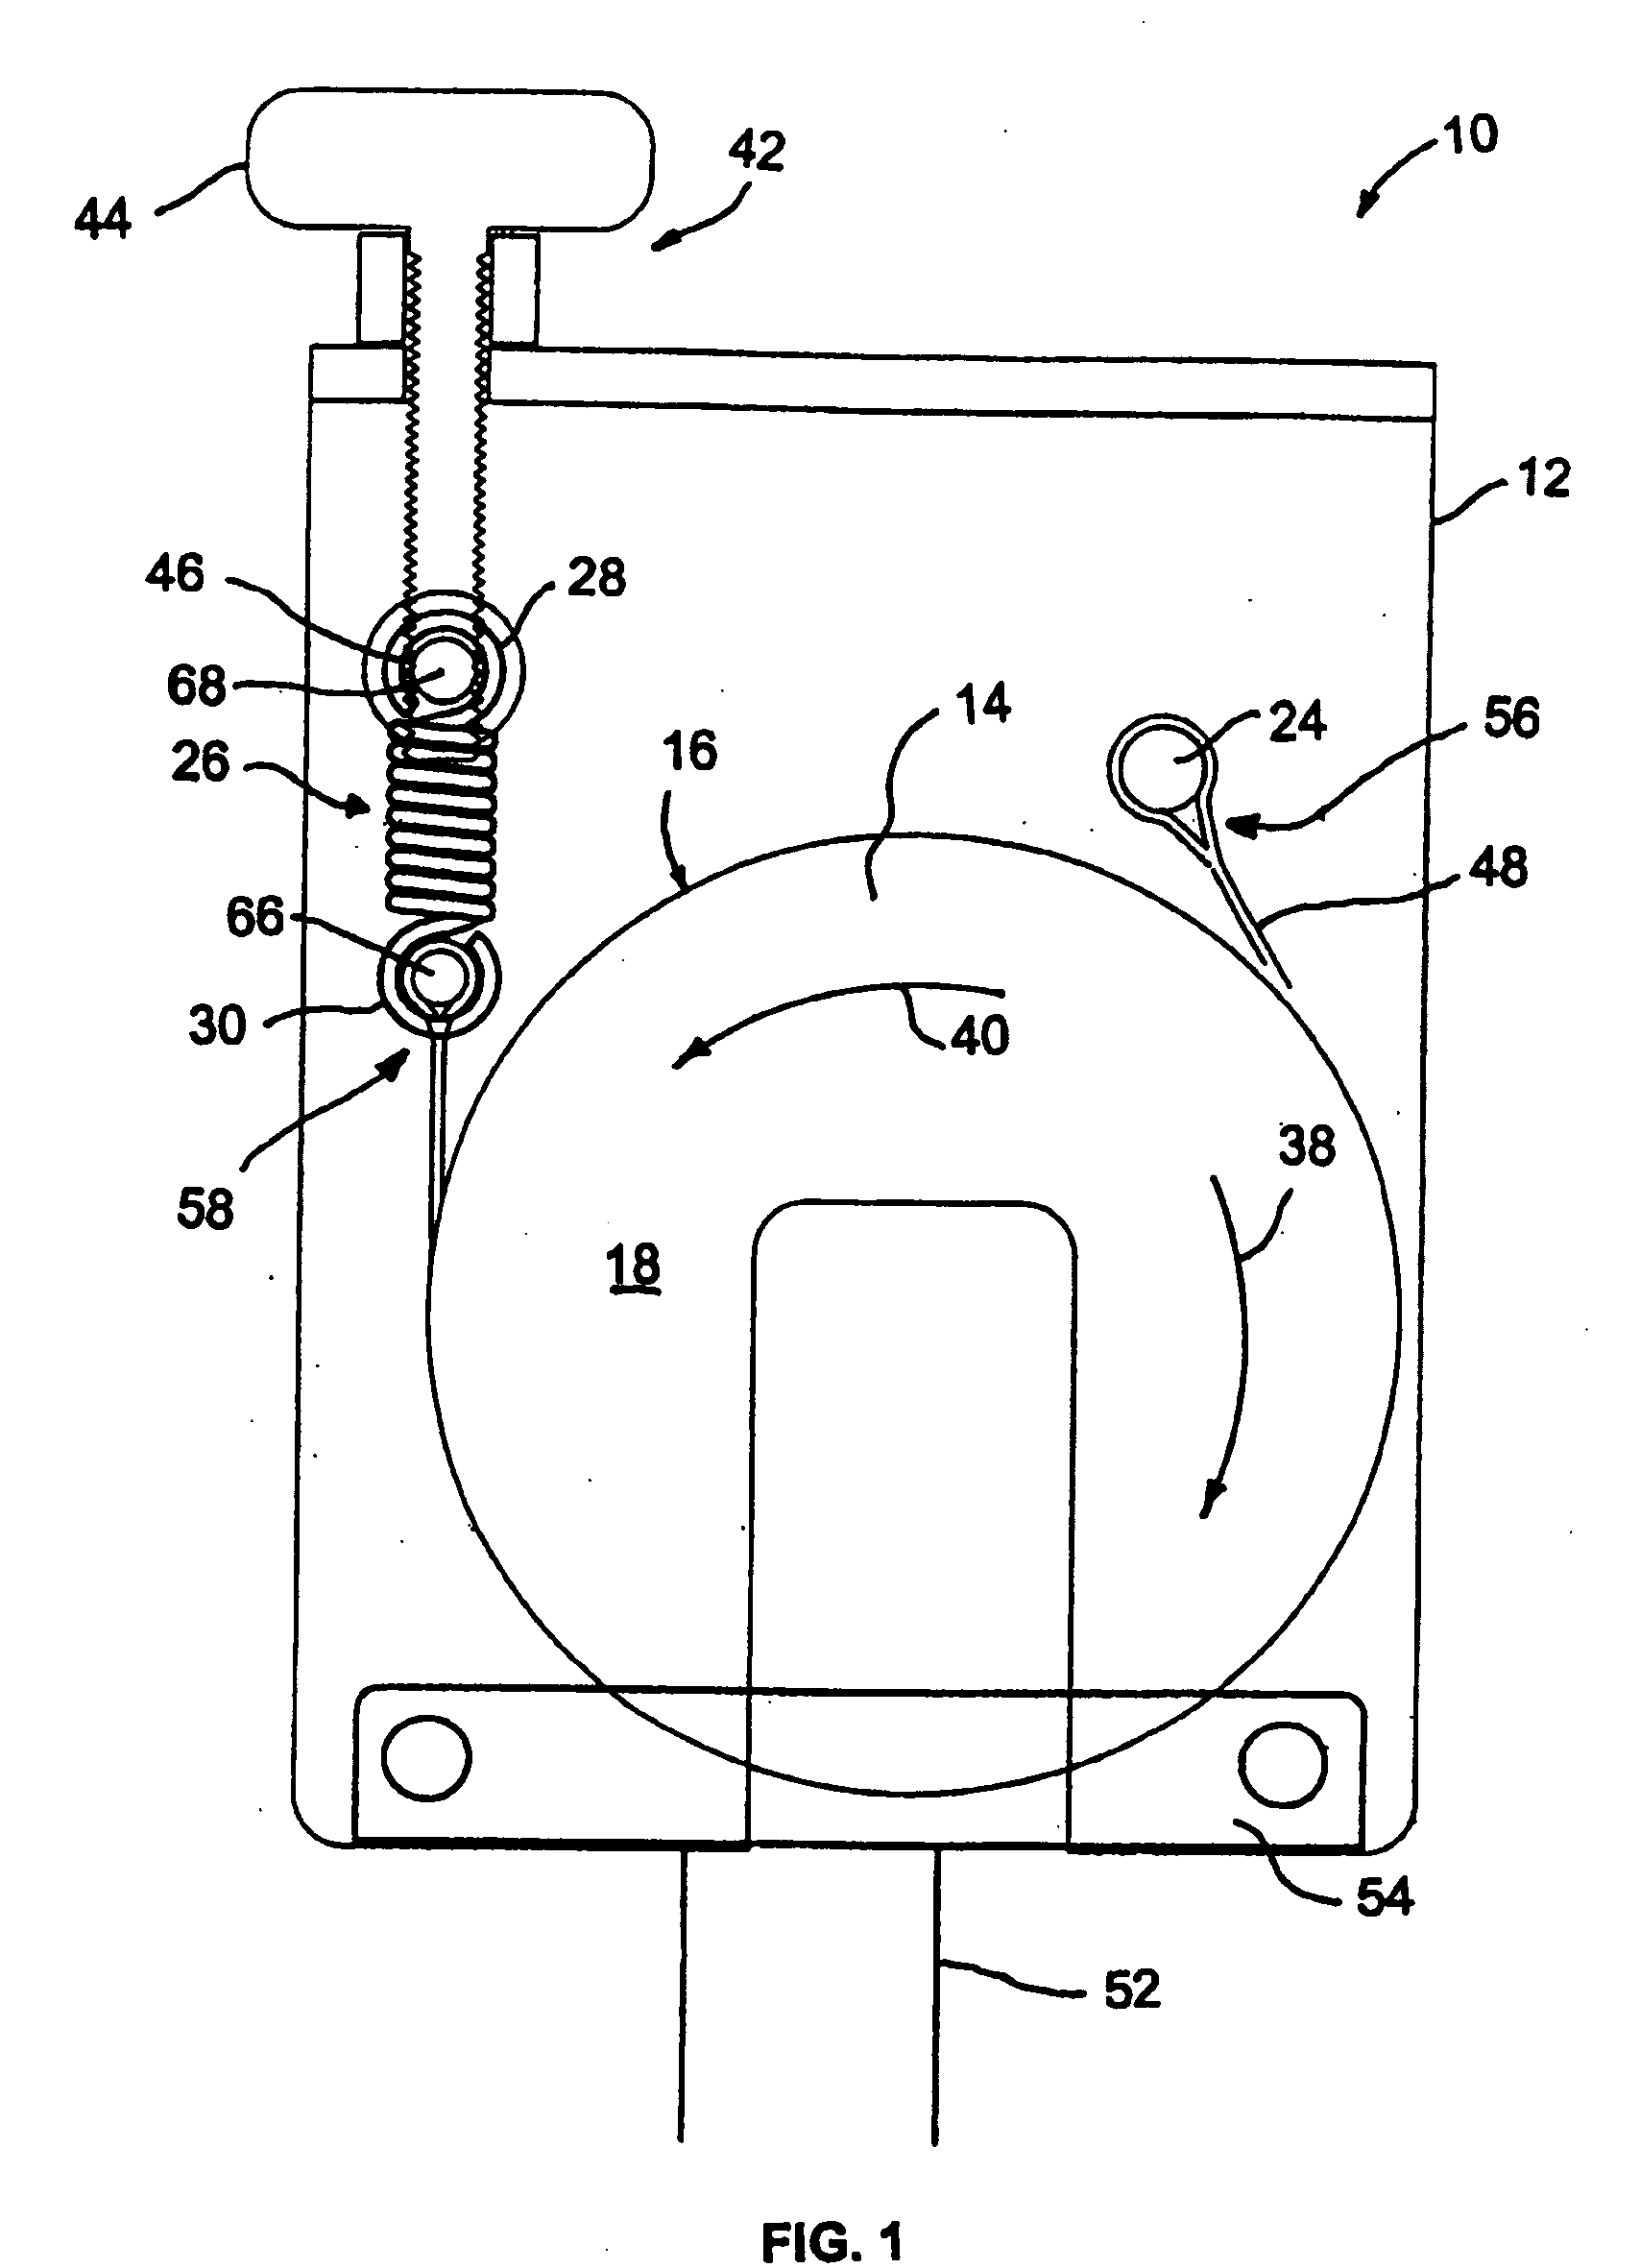 Adjustable linear friction device